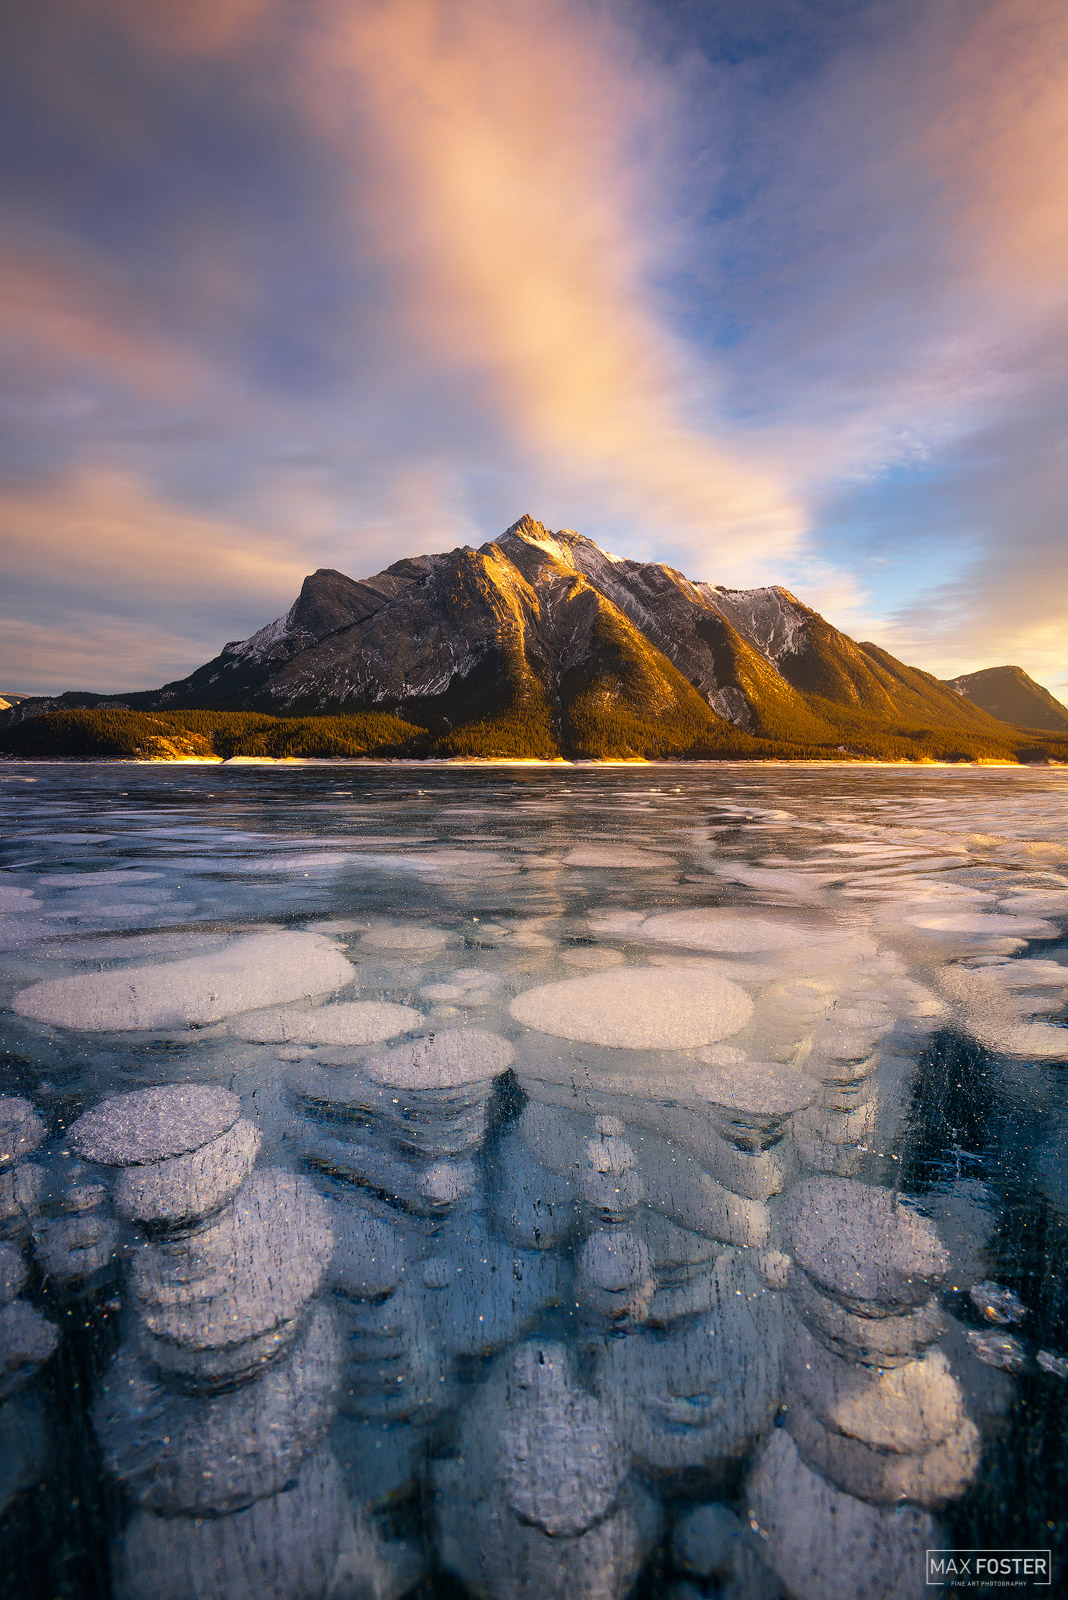 Bring your walls to life with Brilliant Depths, Max Foster's limited edition photography print of Abraham Lake in Jasper National...